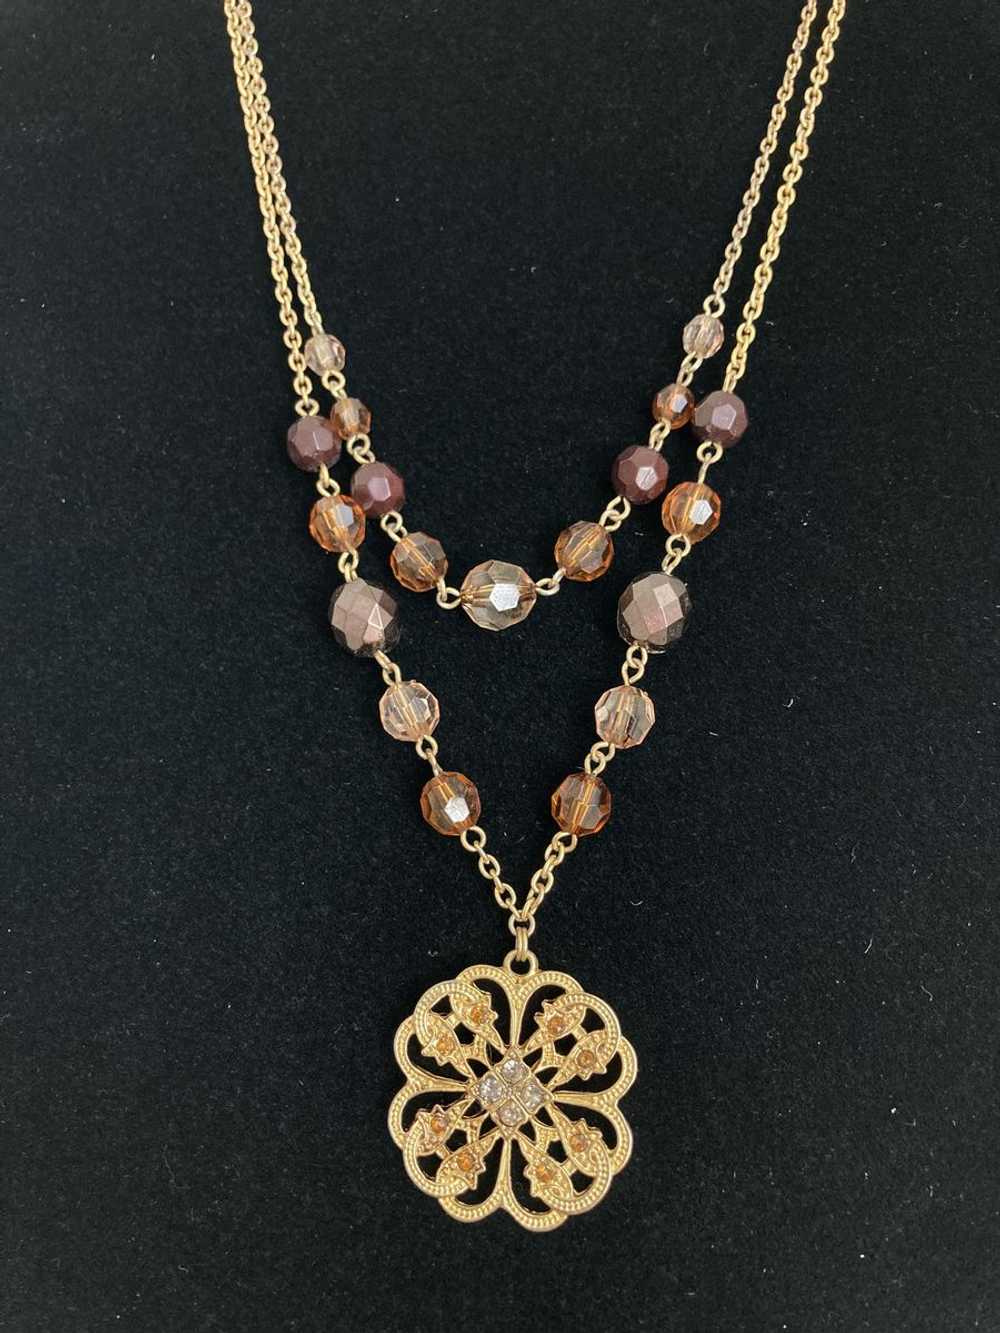 Double Layer Necklace Brown Beads Gold Tone Penda… - image 2